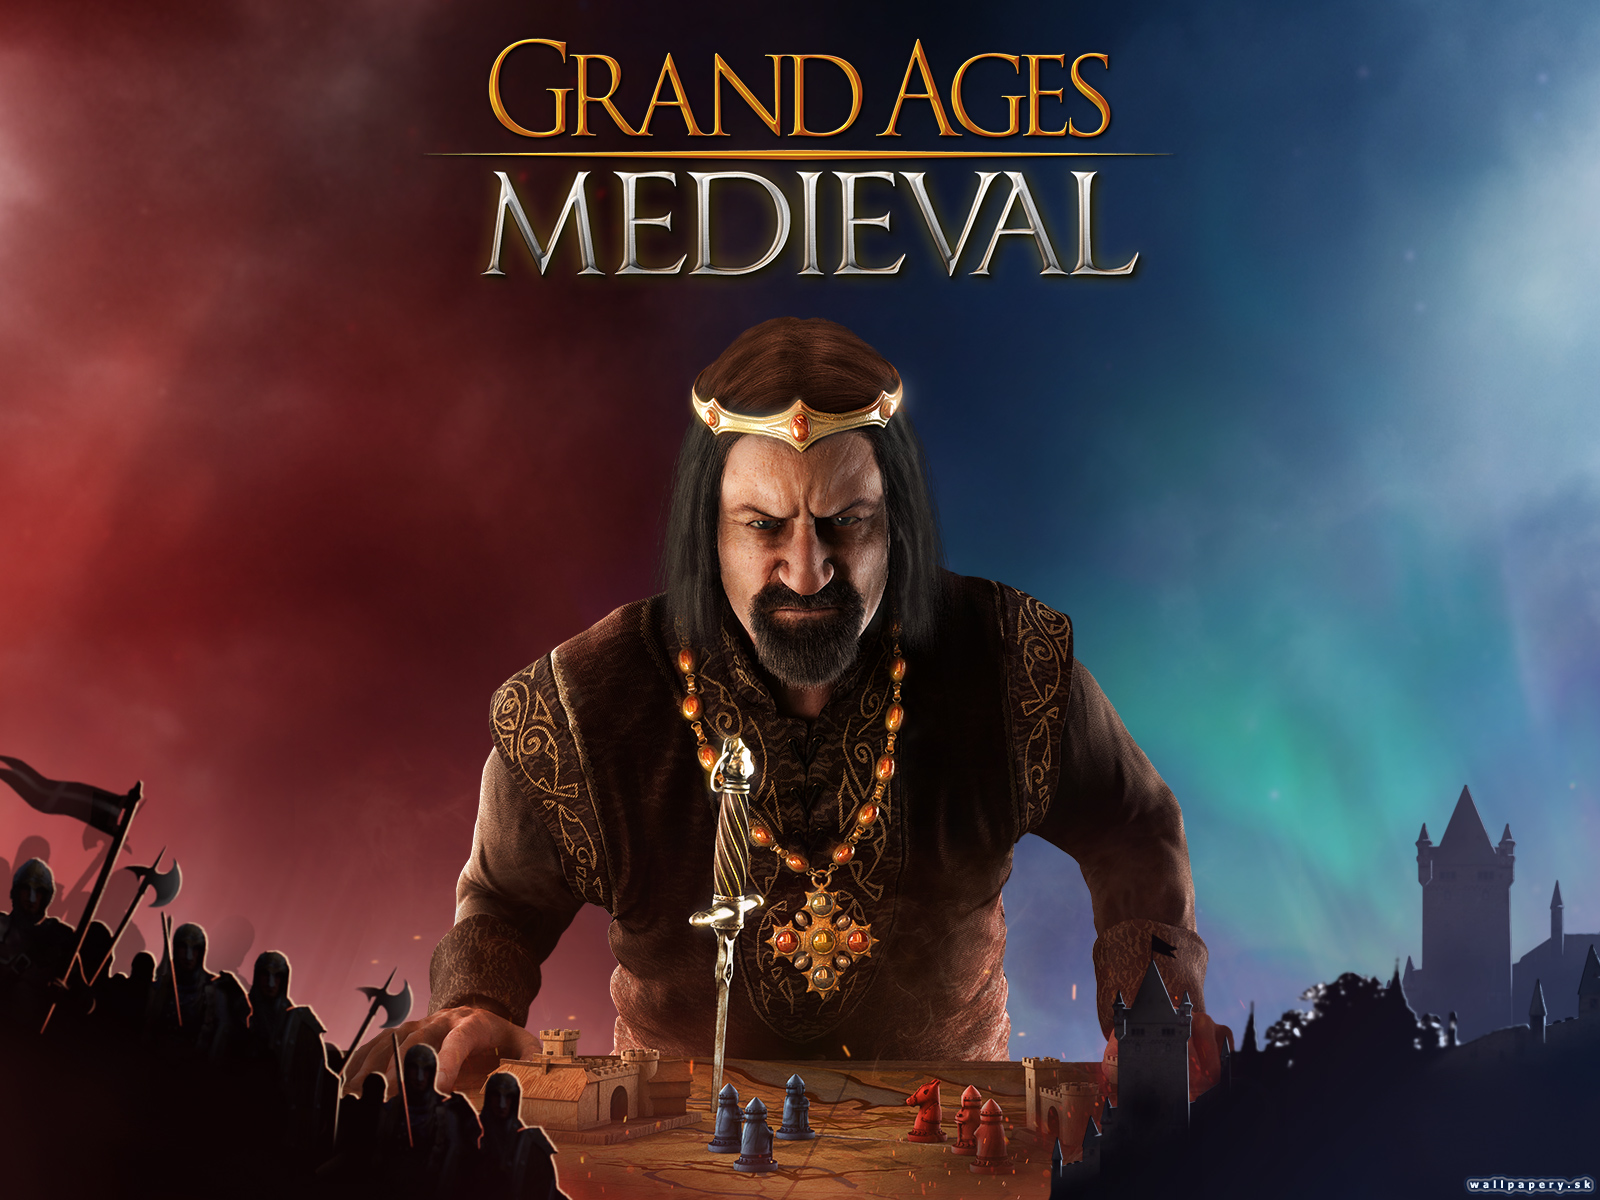 Grand Ages: Medieval - wallpaper 1